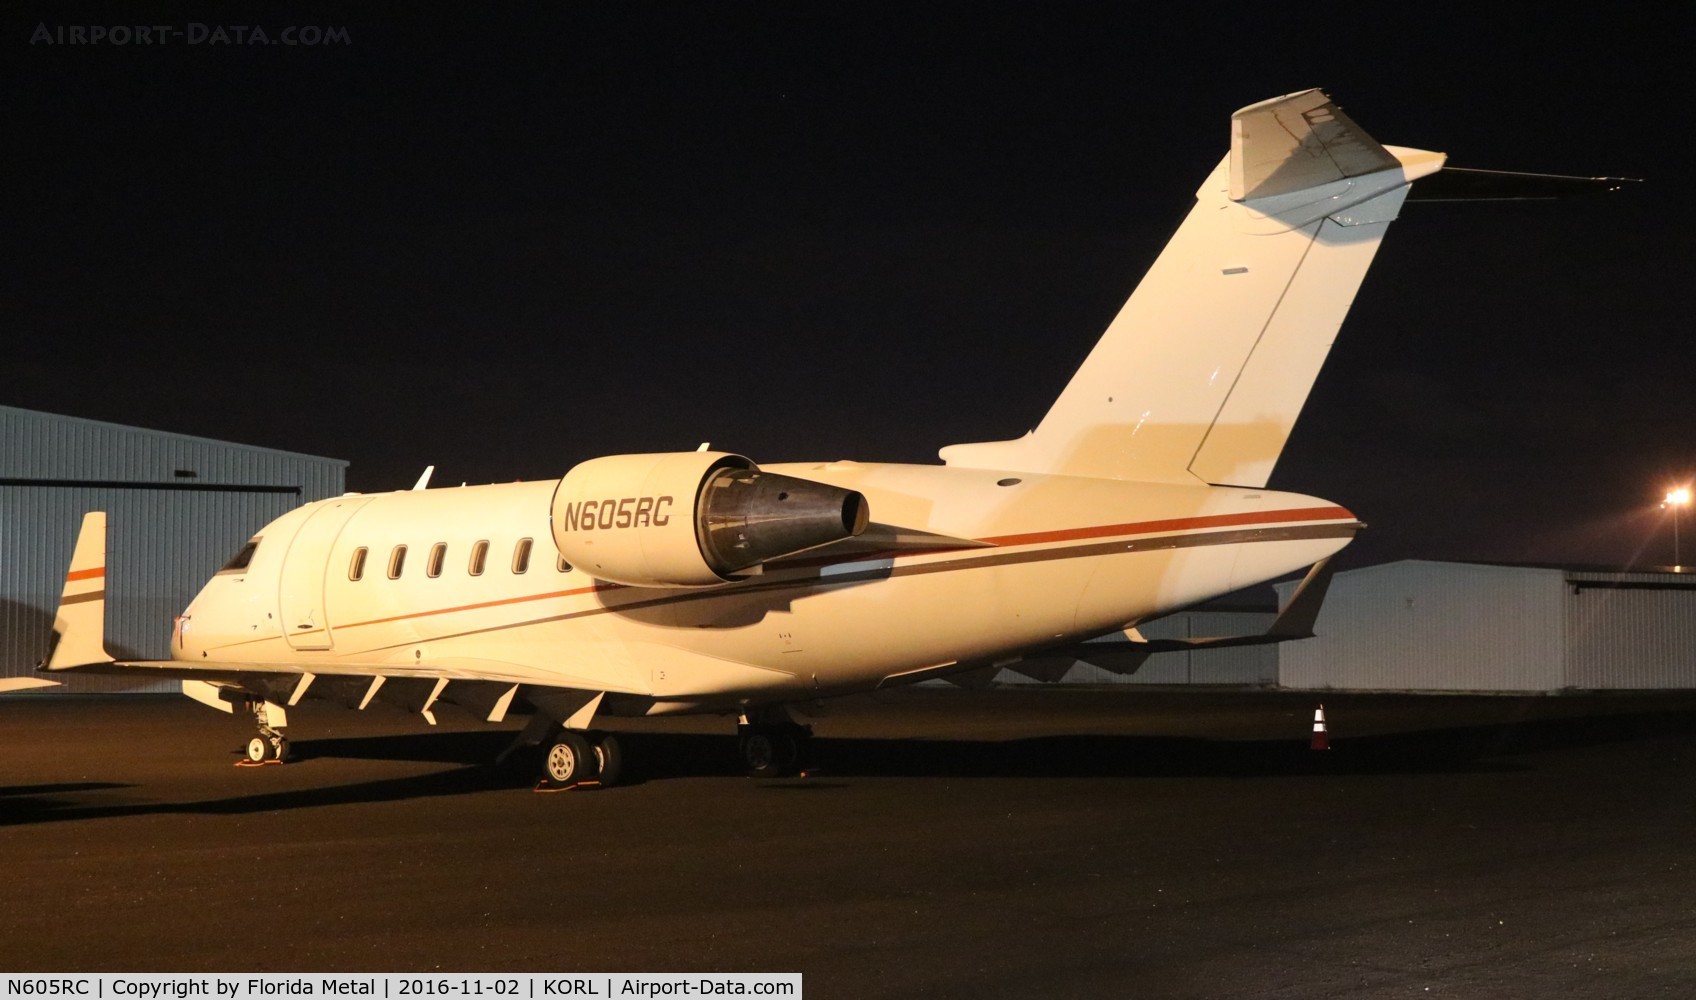 N605RC, 2009 Bombardier Challenger 605 (CL-600-2B16) C/N 5800, Challenger 605 zx